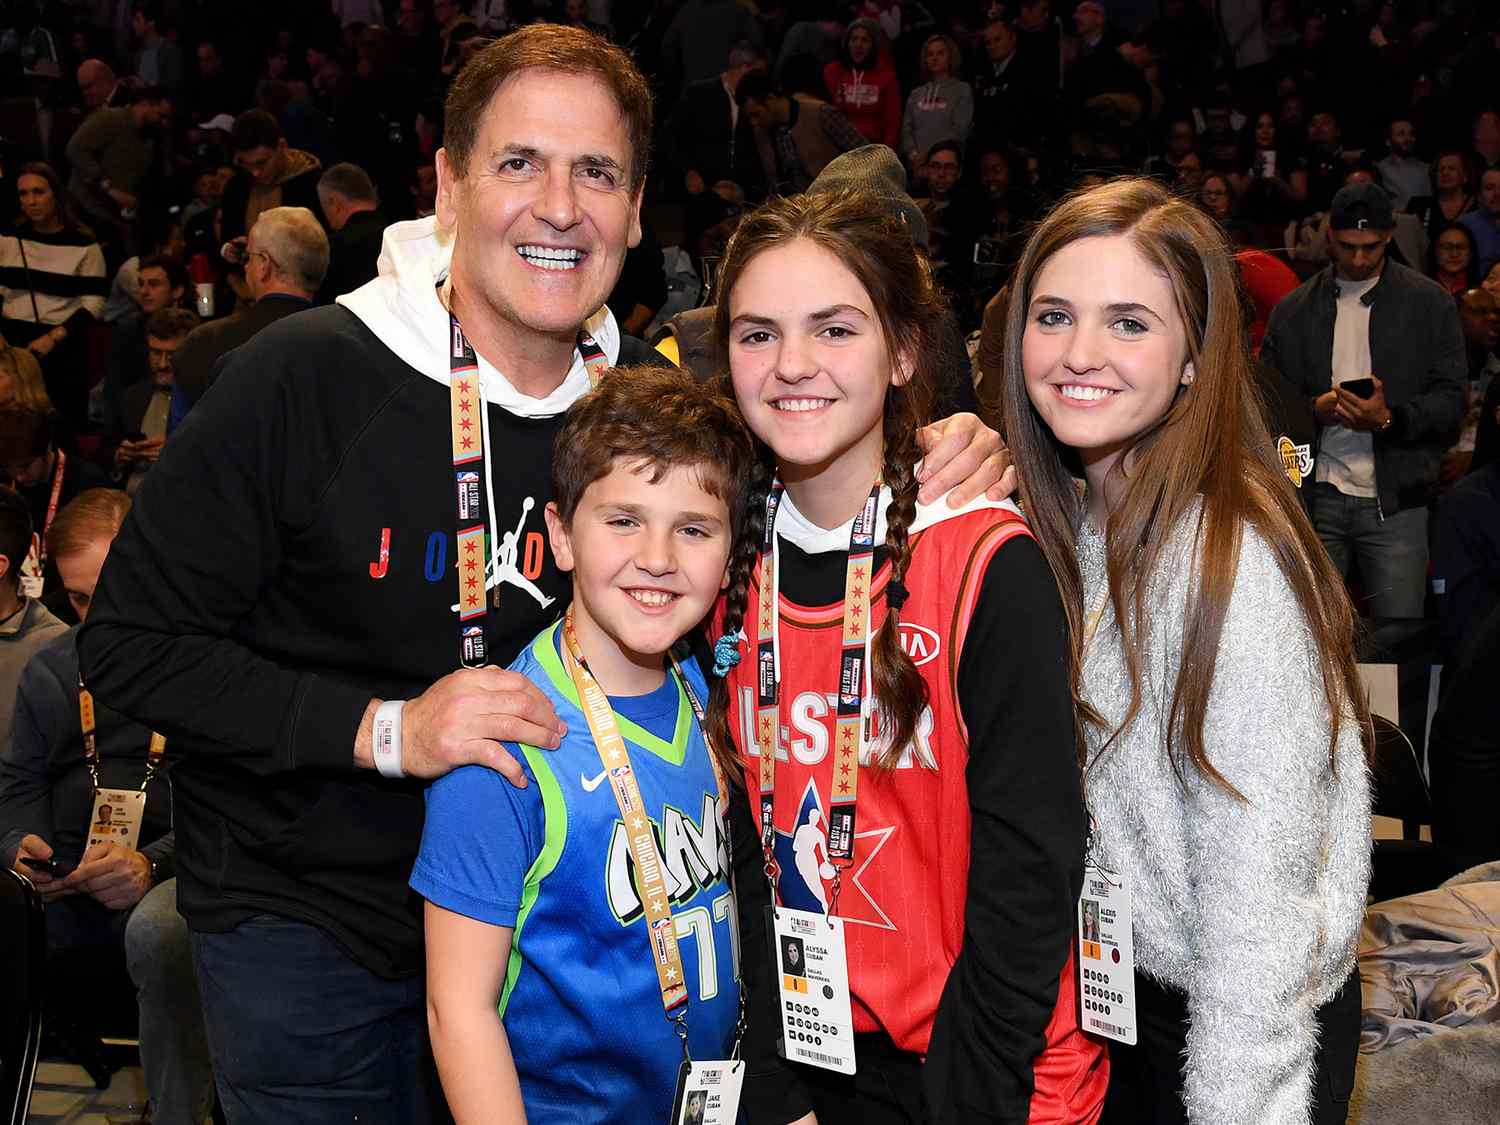 Mark Cuban's 3 Kids All About Alexis, Alyssa and Jake